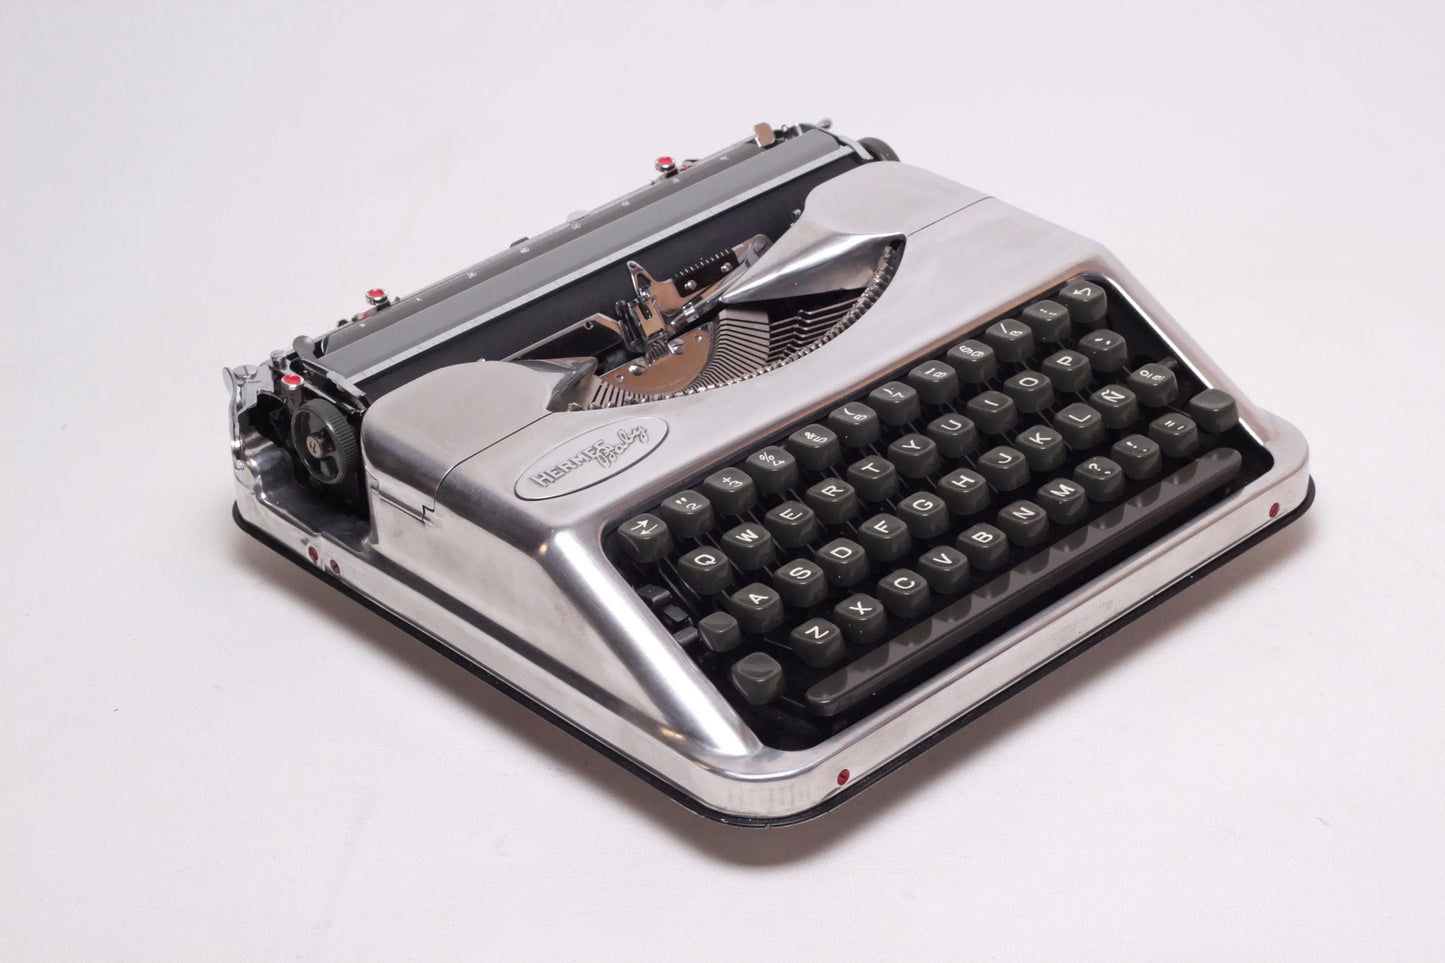 Limited Edition Hermes Baby Polished Silver, Vintage, Mint Condition, Manual Portable, Professionally Serviced by Typewriter.Company - ElGranero Typewriter.Company